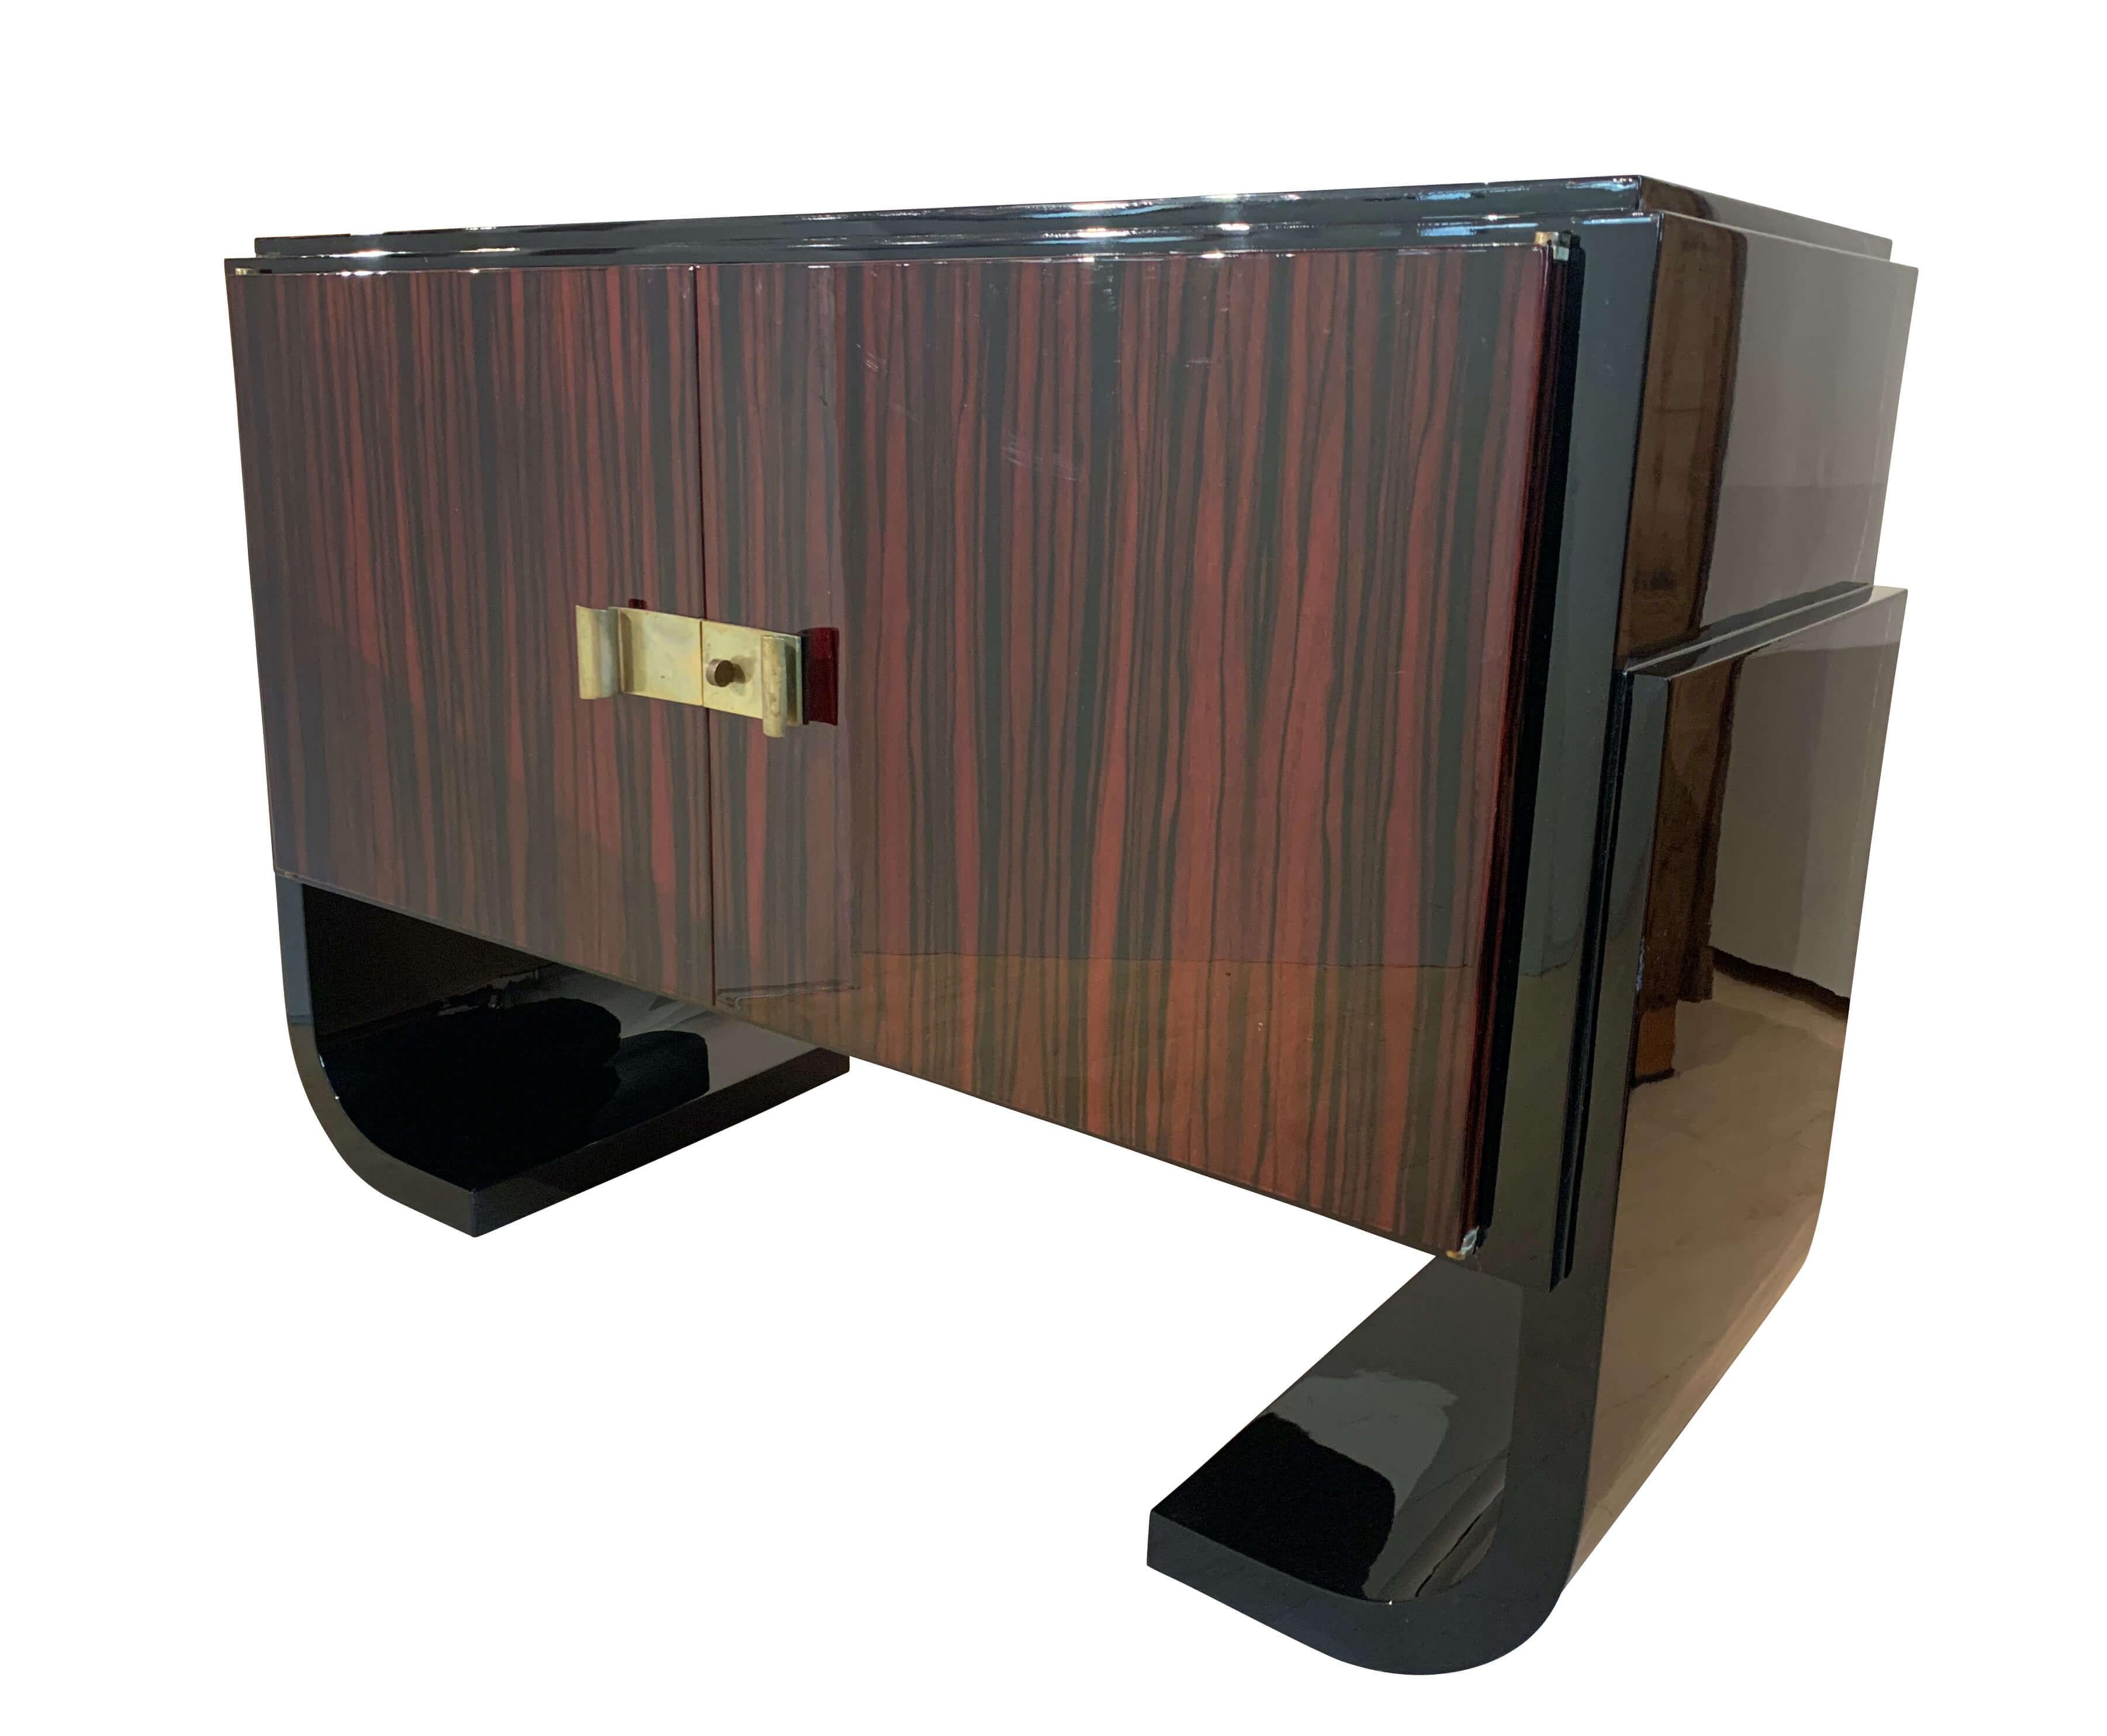 Small French Art Deco sideboard, macassar and black lacquer, 1930s

Provenience: France, 1930s
Macassar veneered and lacquered on the doors. Black piano lacquer on the legs, sides and top.
Doors inside and three drawers veneered in mahogany and